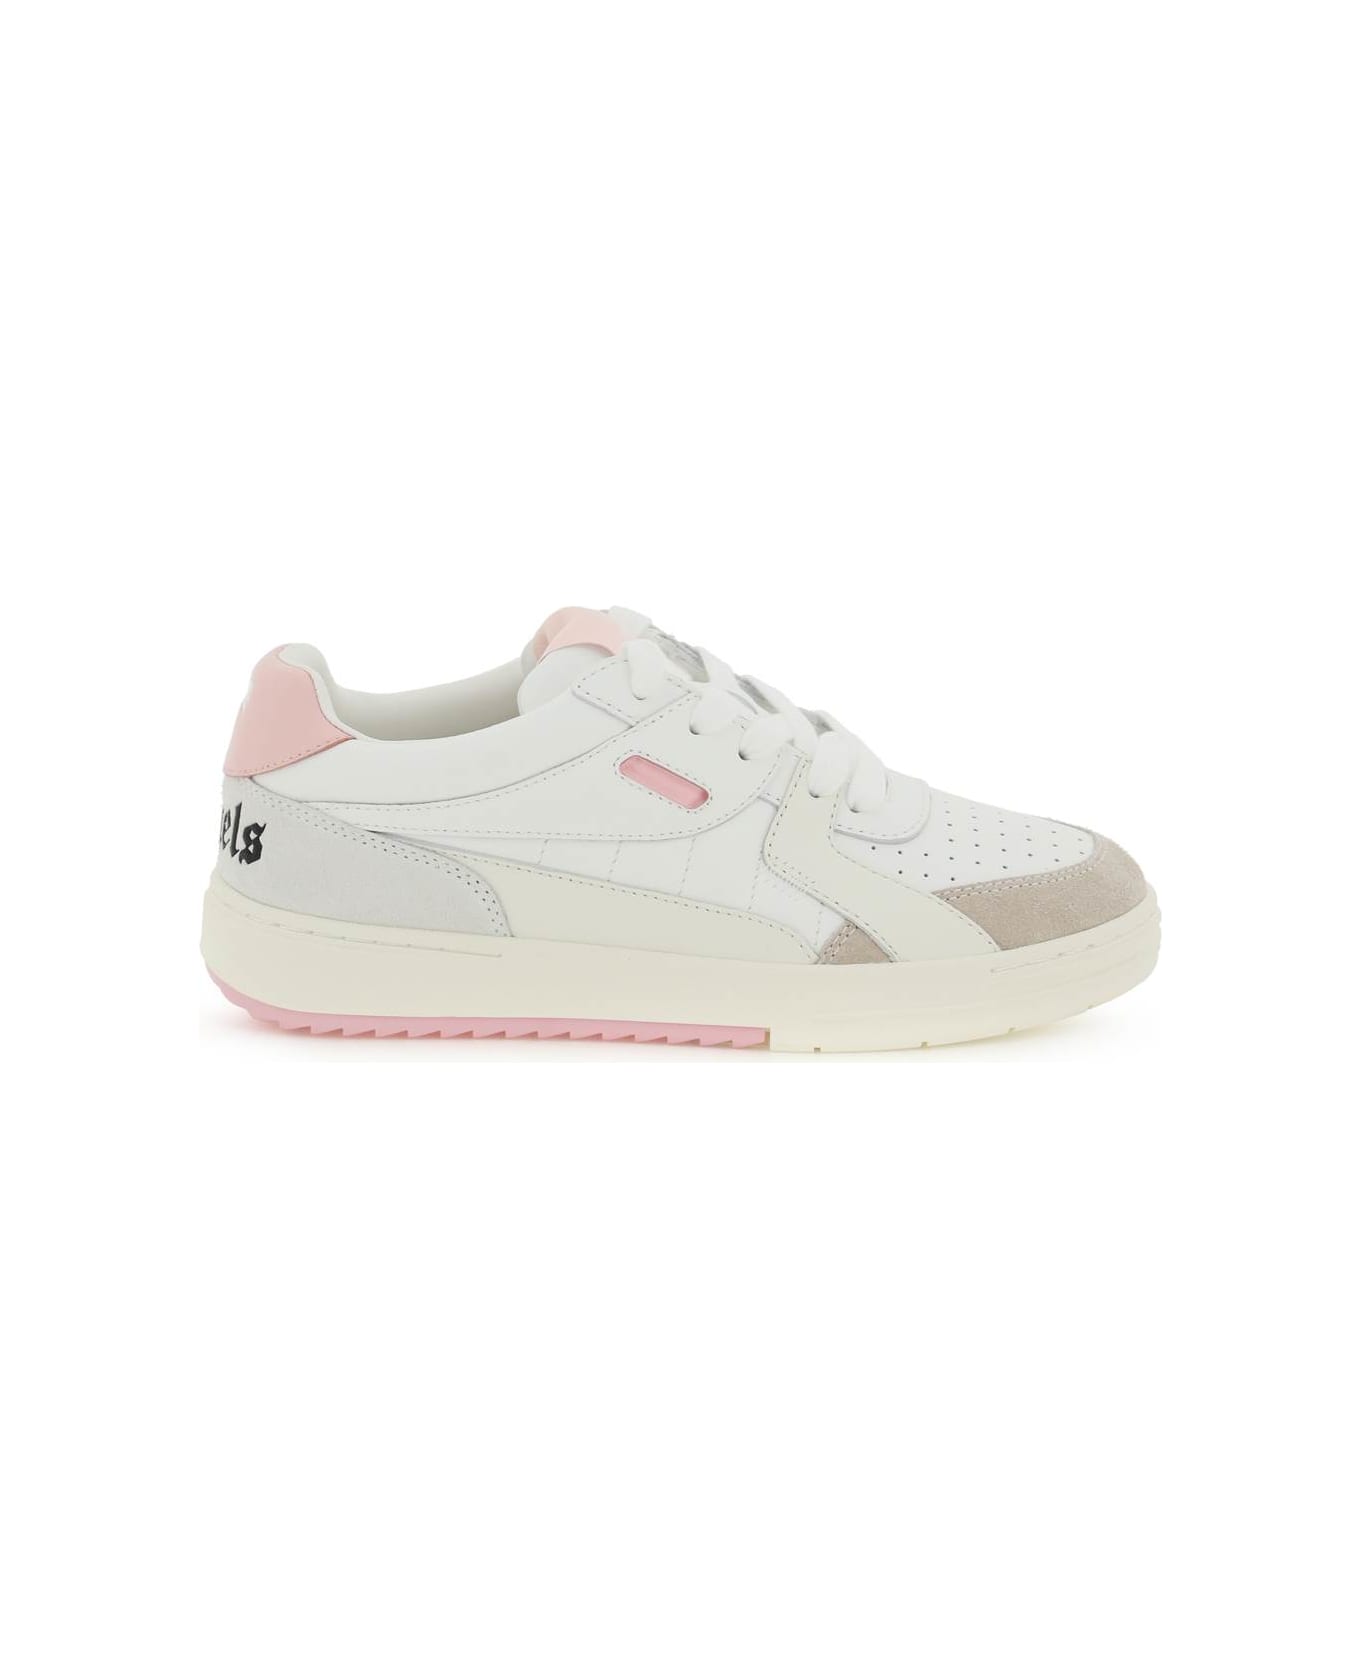 Palm Angels Palm University Sneakers - WHITE PINK (White)